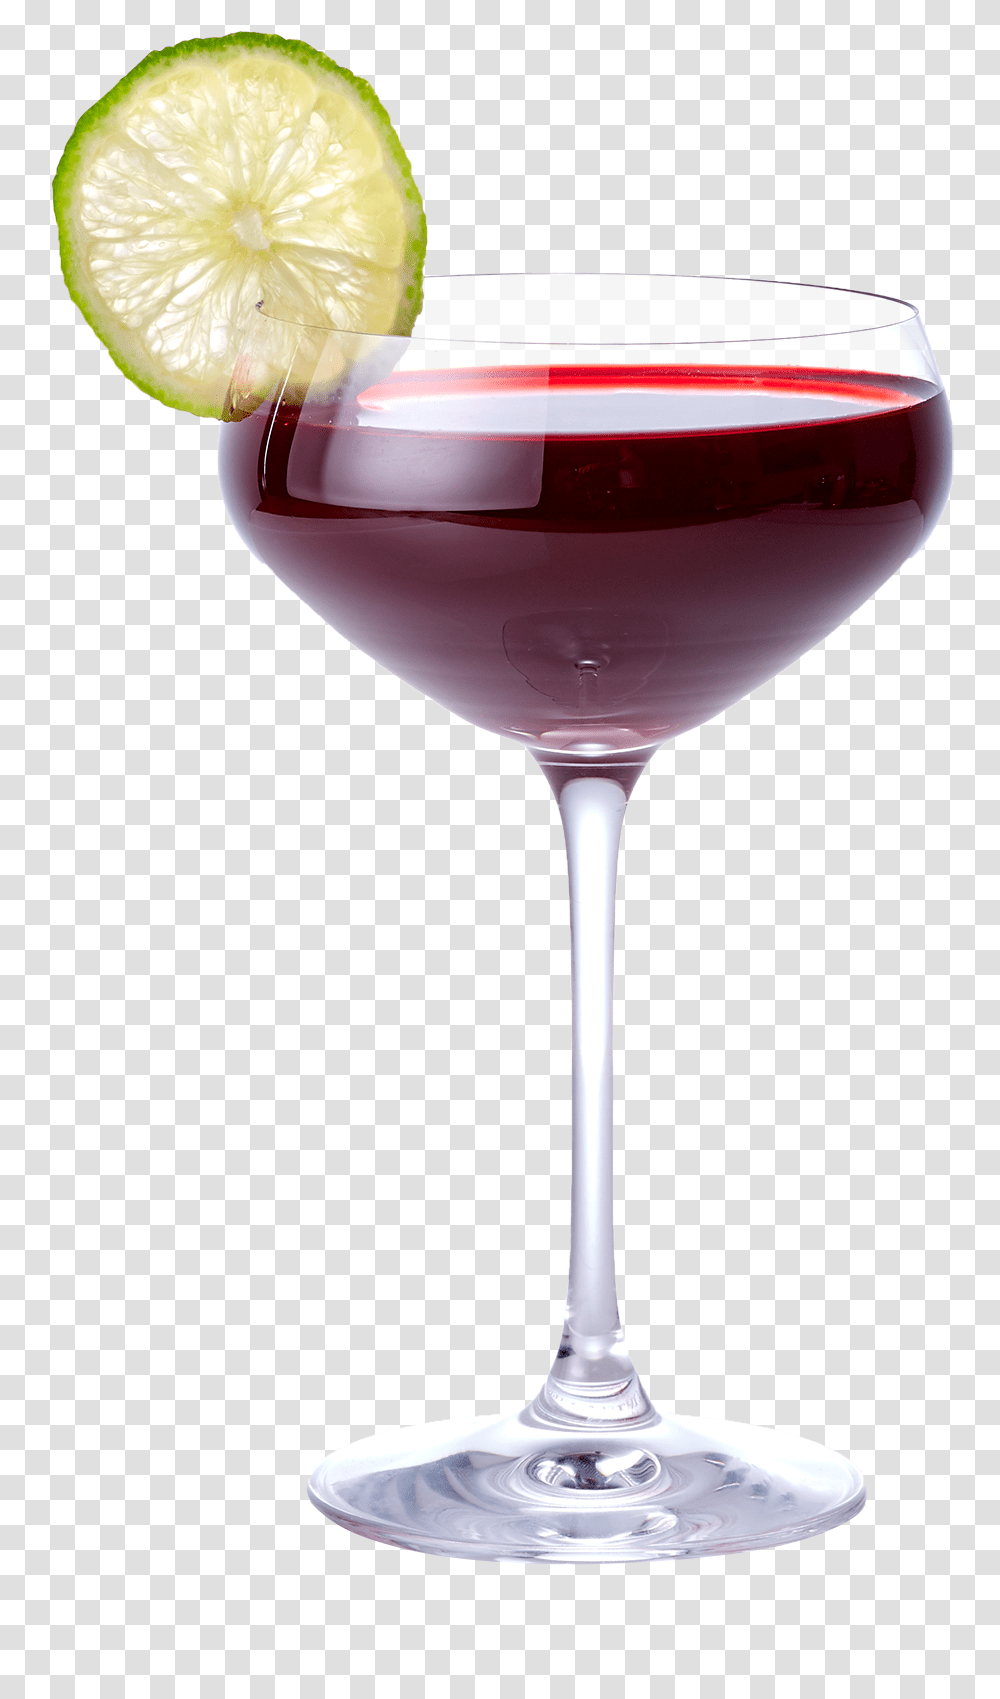 Beet Drink Amp Be Merry, Glass, Wine, Alcohol, Beverage Transparent Png